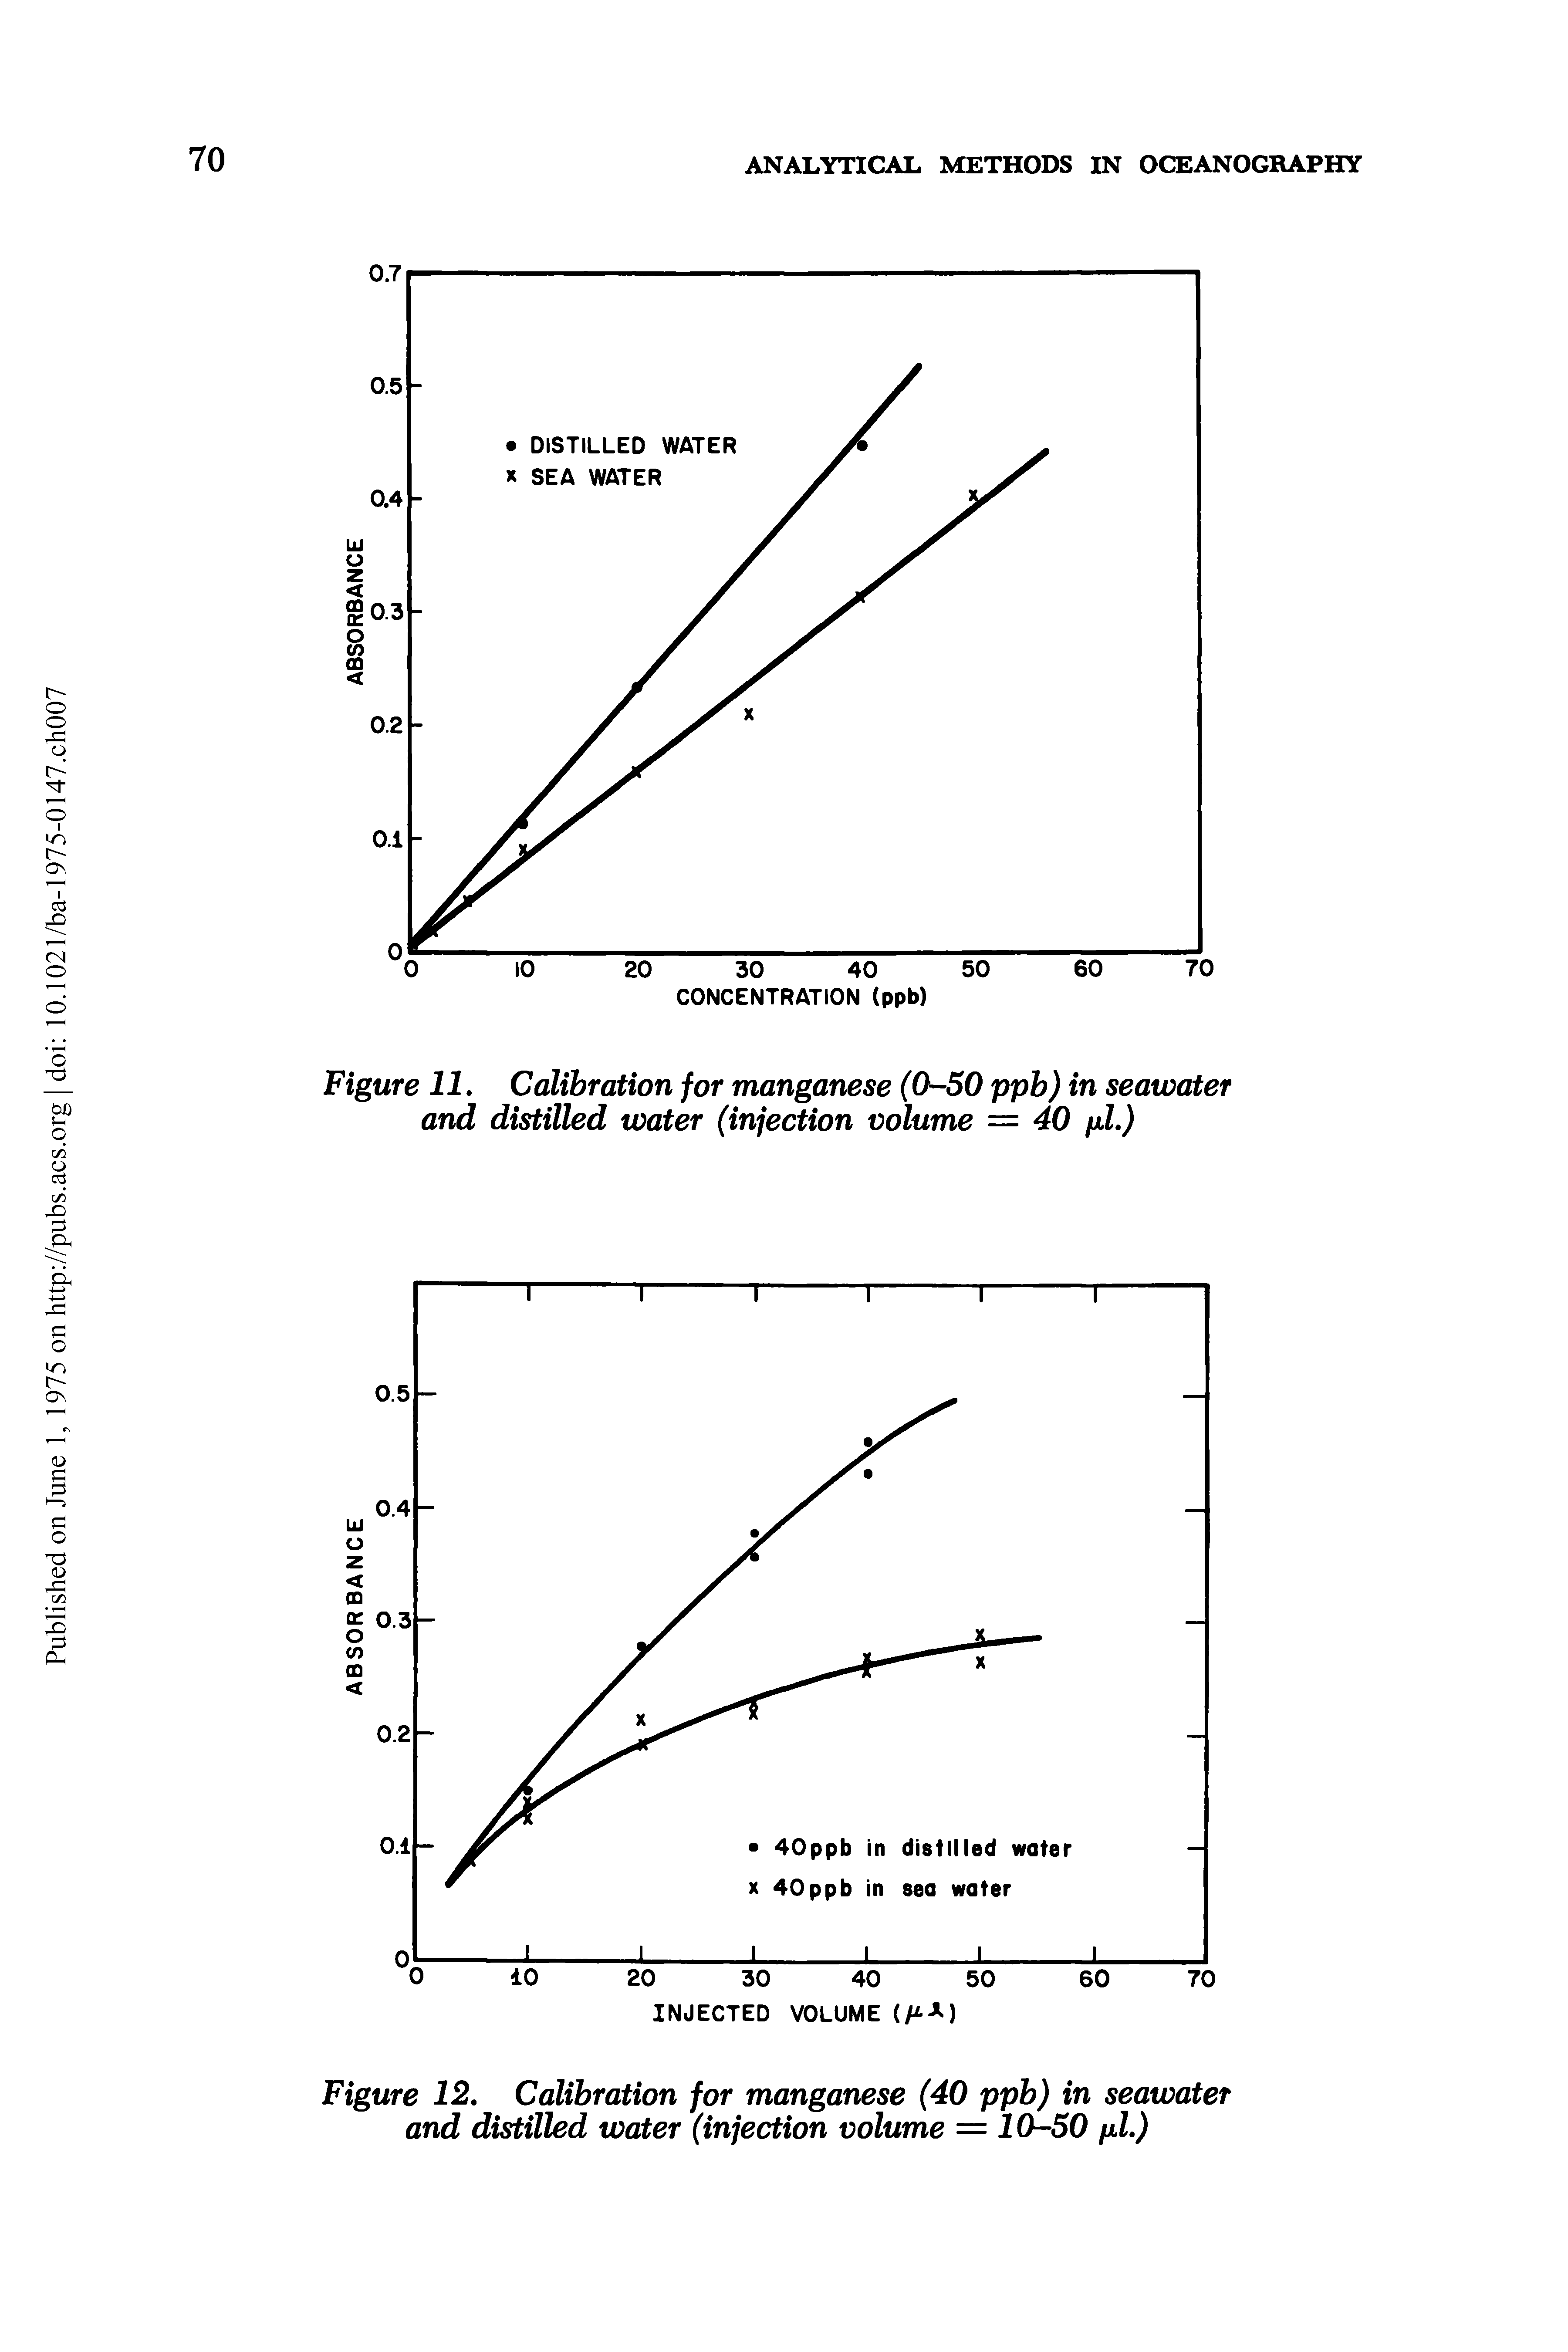 Figure 11, Calibration for manganese (0-50 ppb) in seawater and distilled water (injection volume = 40 pi,)...